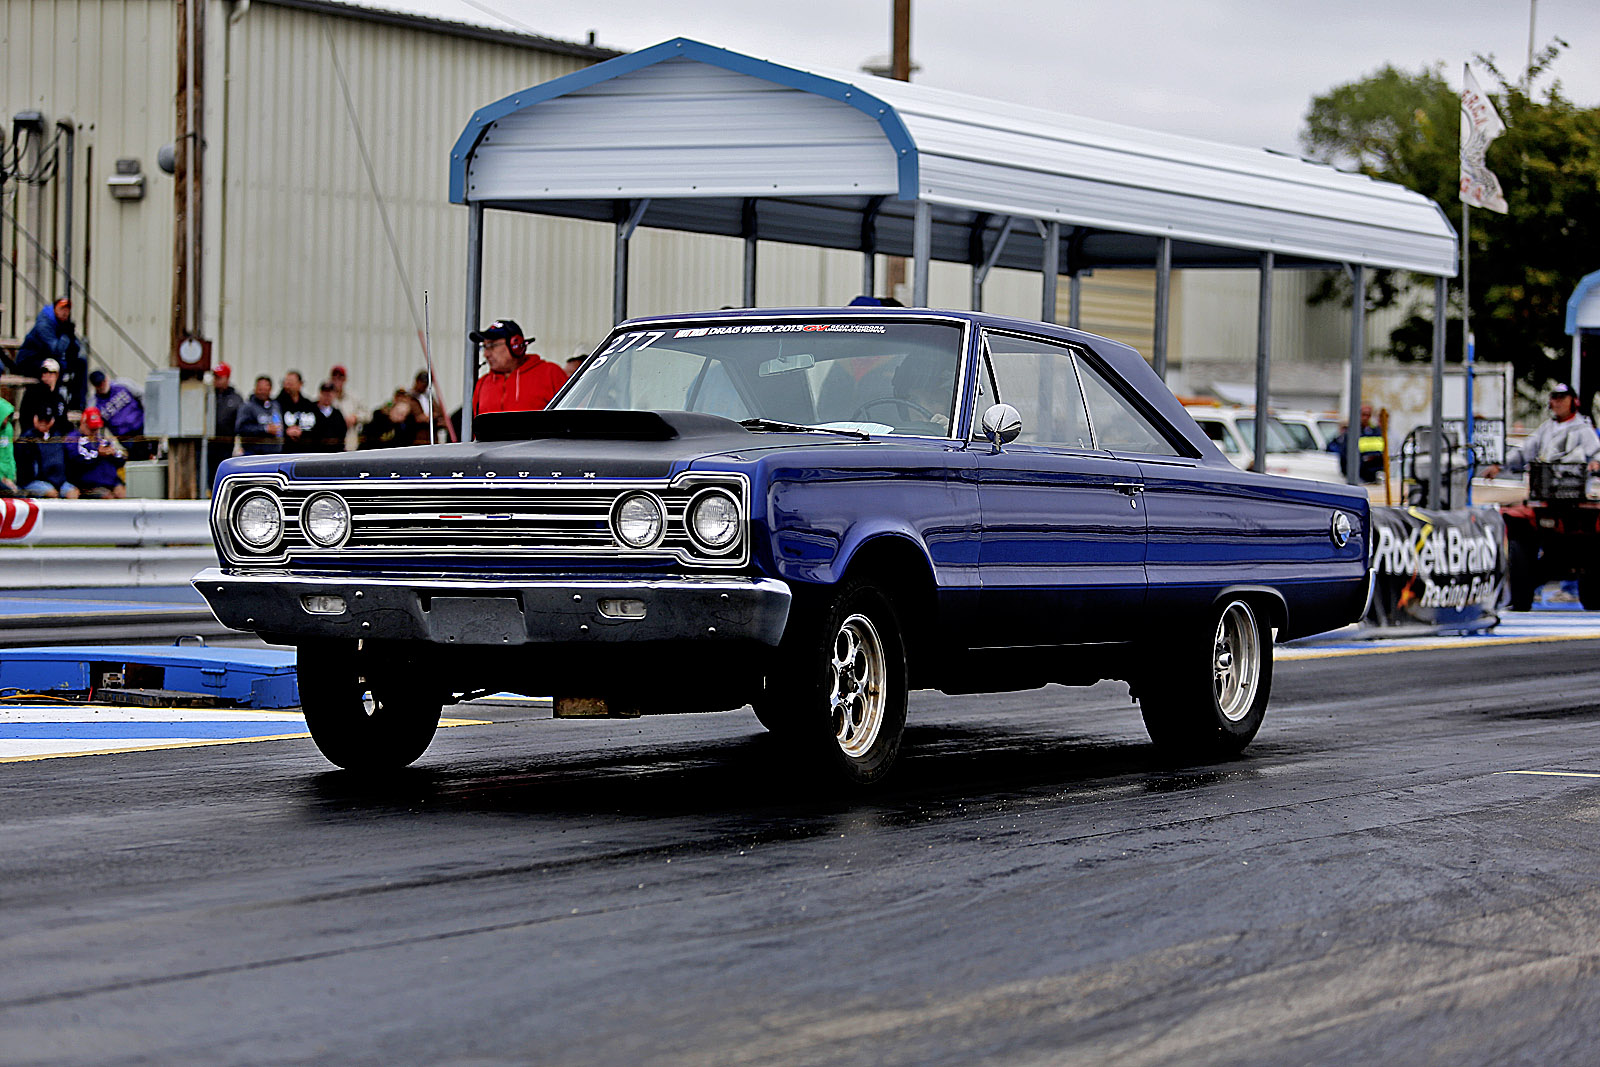 Attached picture 8326834-Racing_Day_4_Great_Bend_Drag_Week_2014-16.jpg